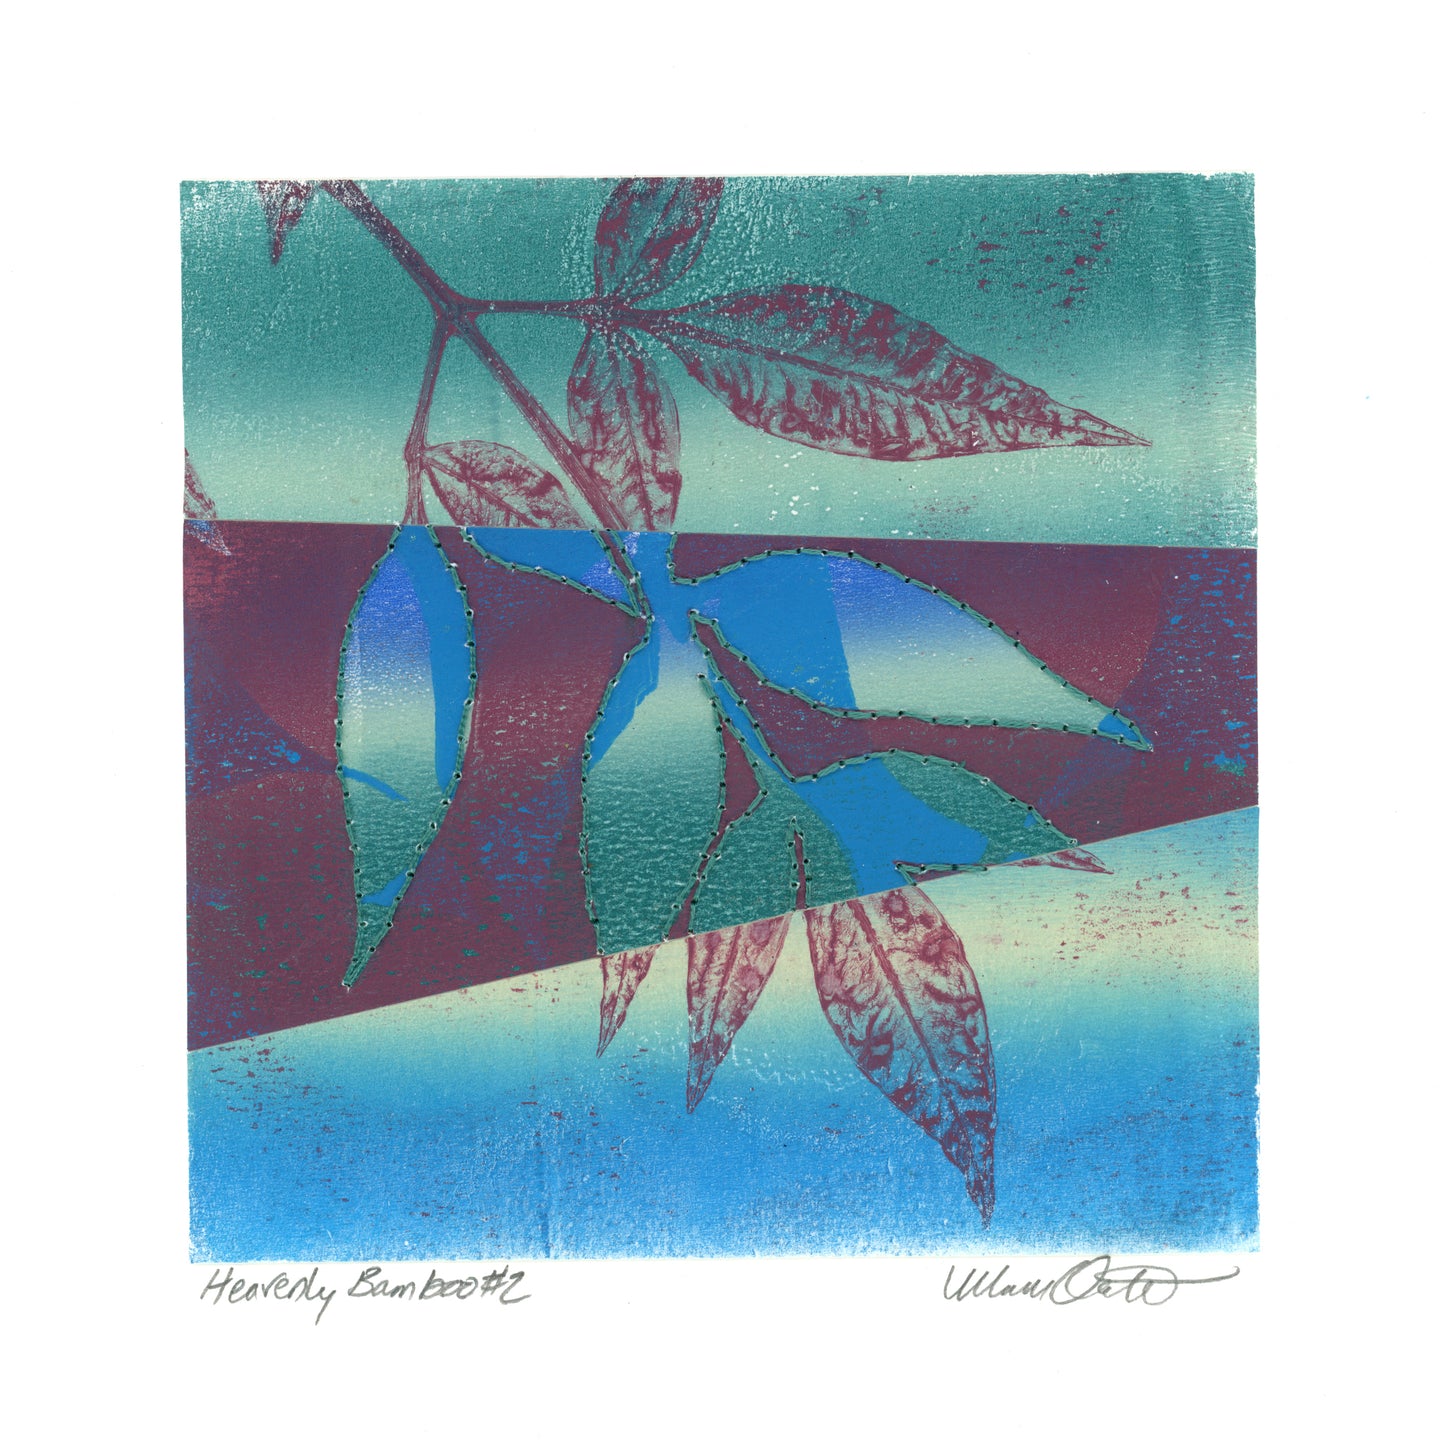 Heavenly Bamboo #2 - Monotype Collage